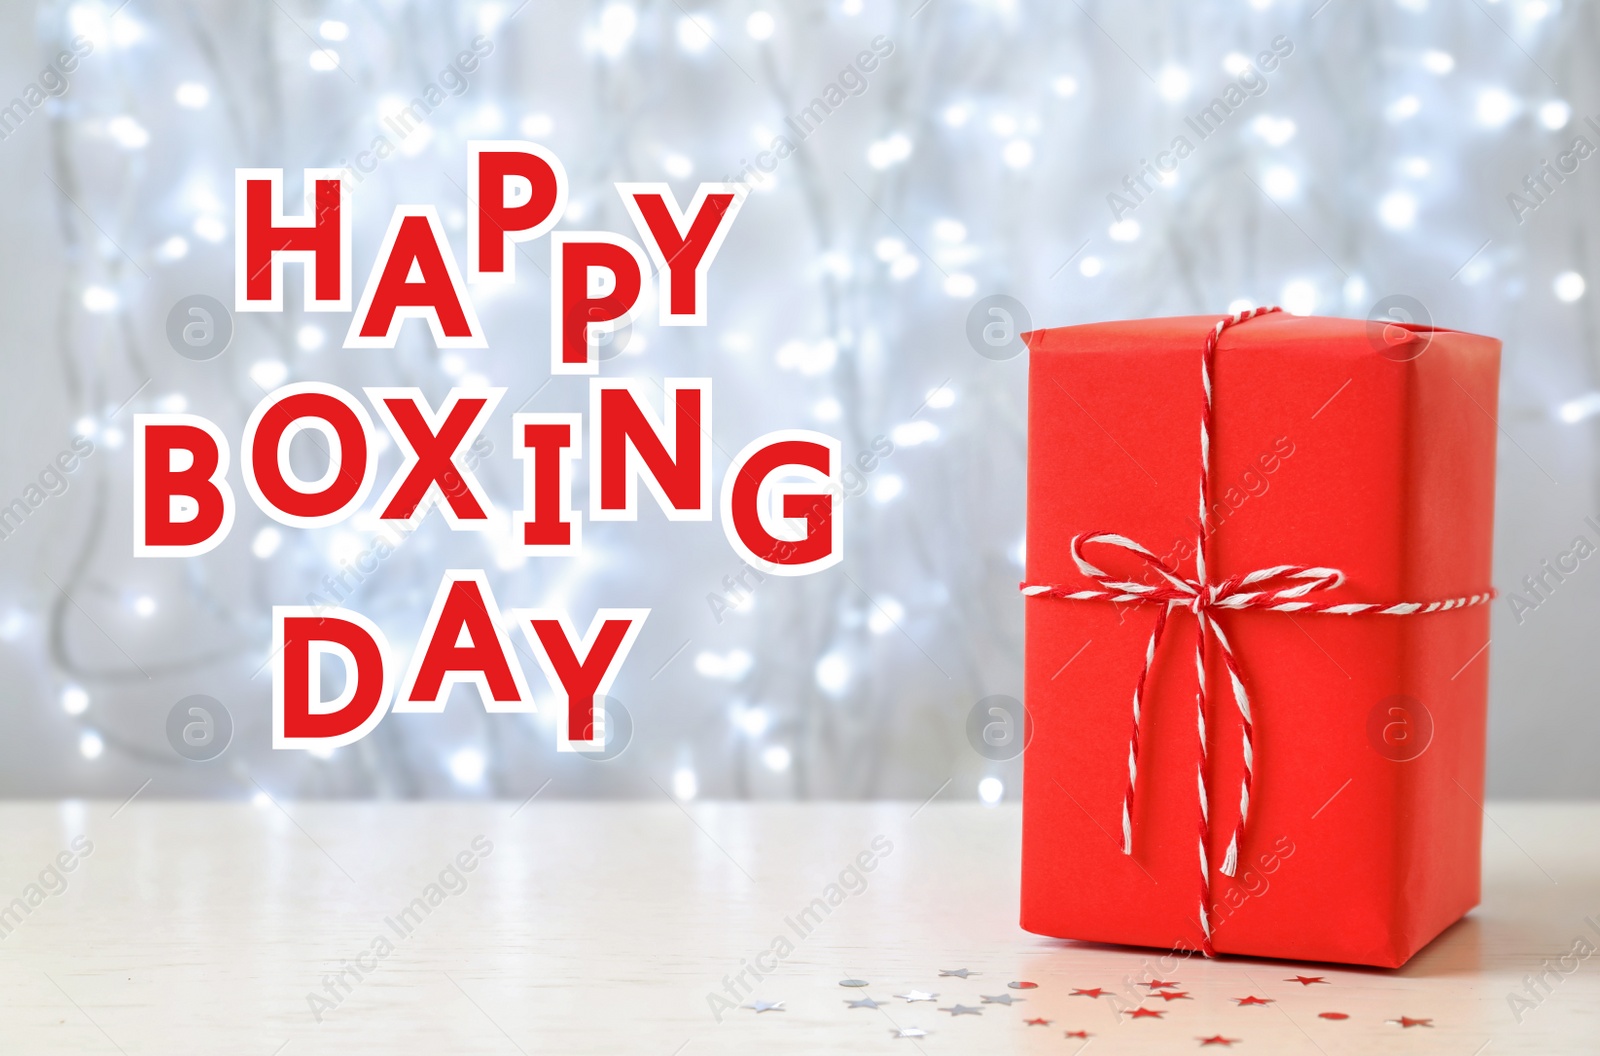 Image of Text Happy Boxing Day near gift against blurred lights